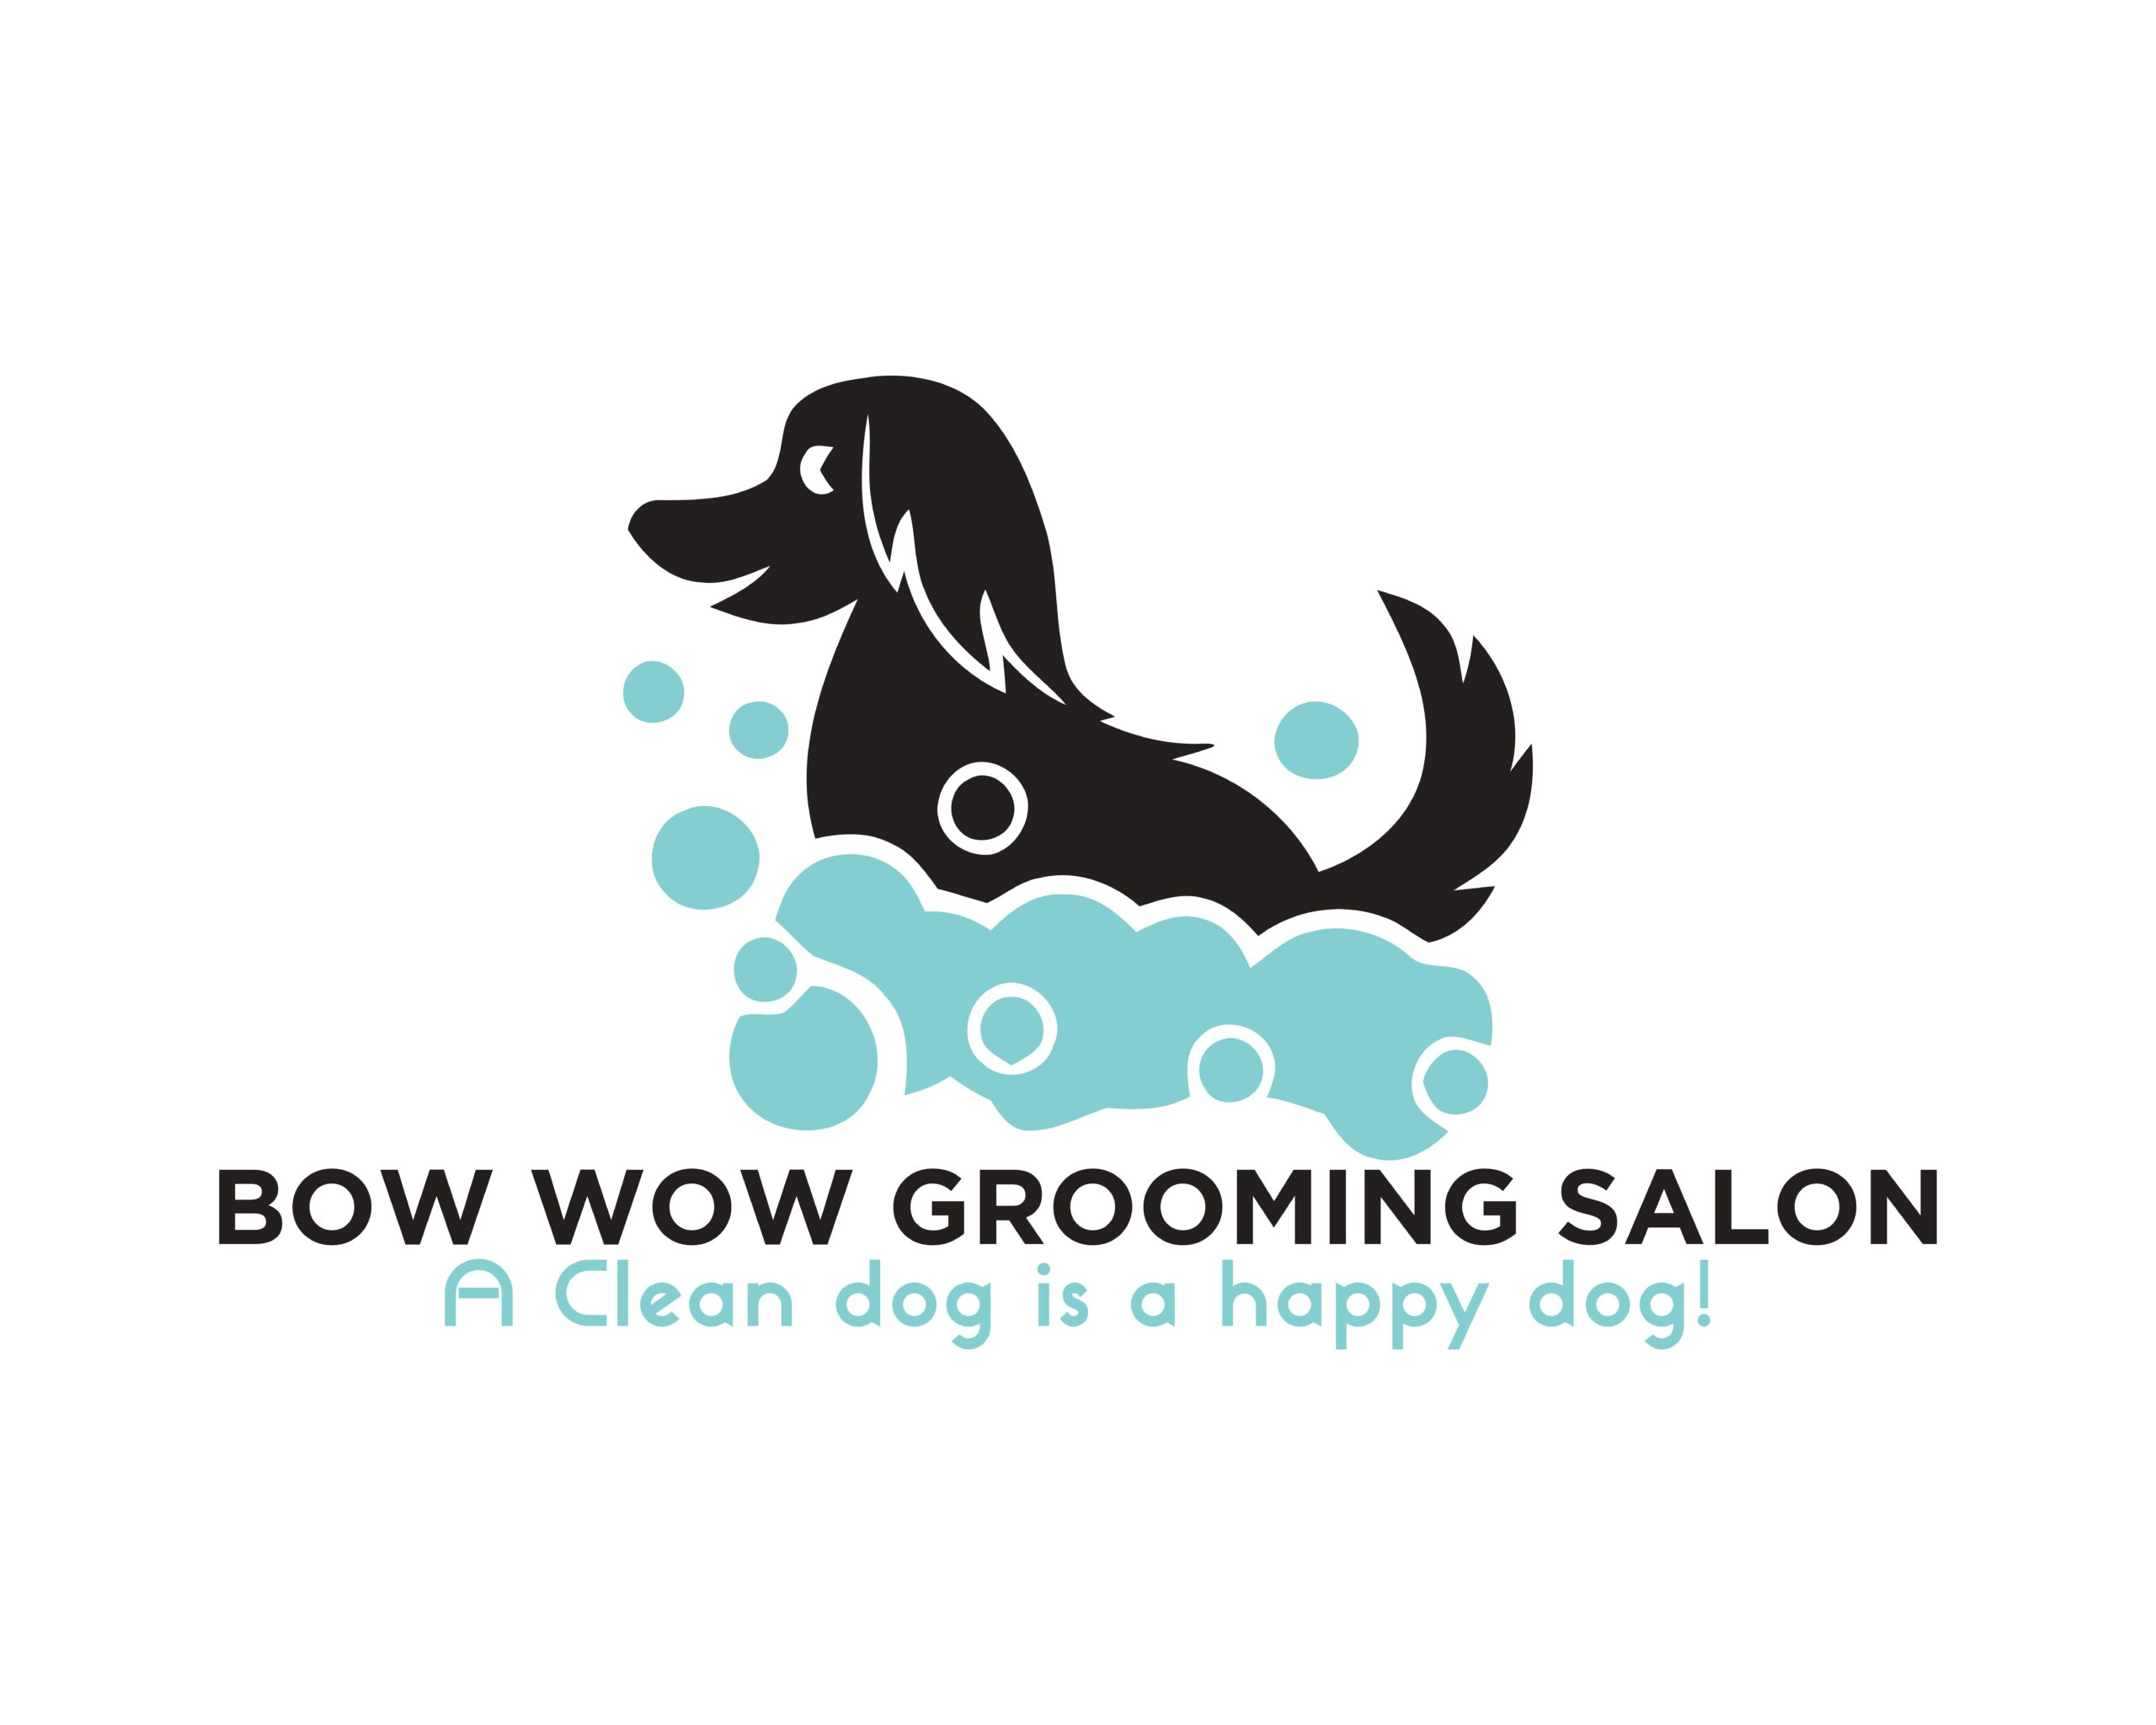 Interview With a Pet Groomer in Lacombe